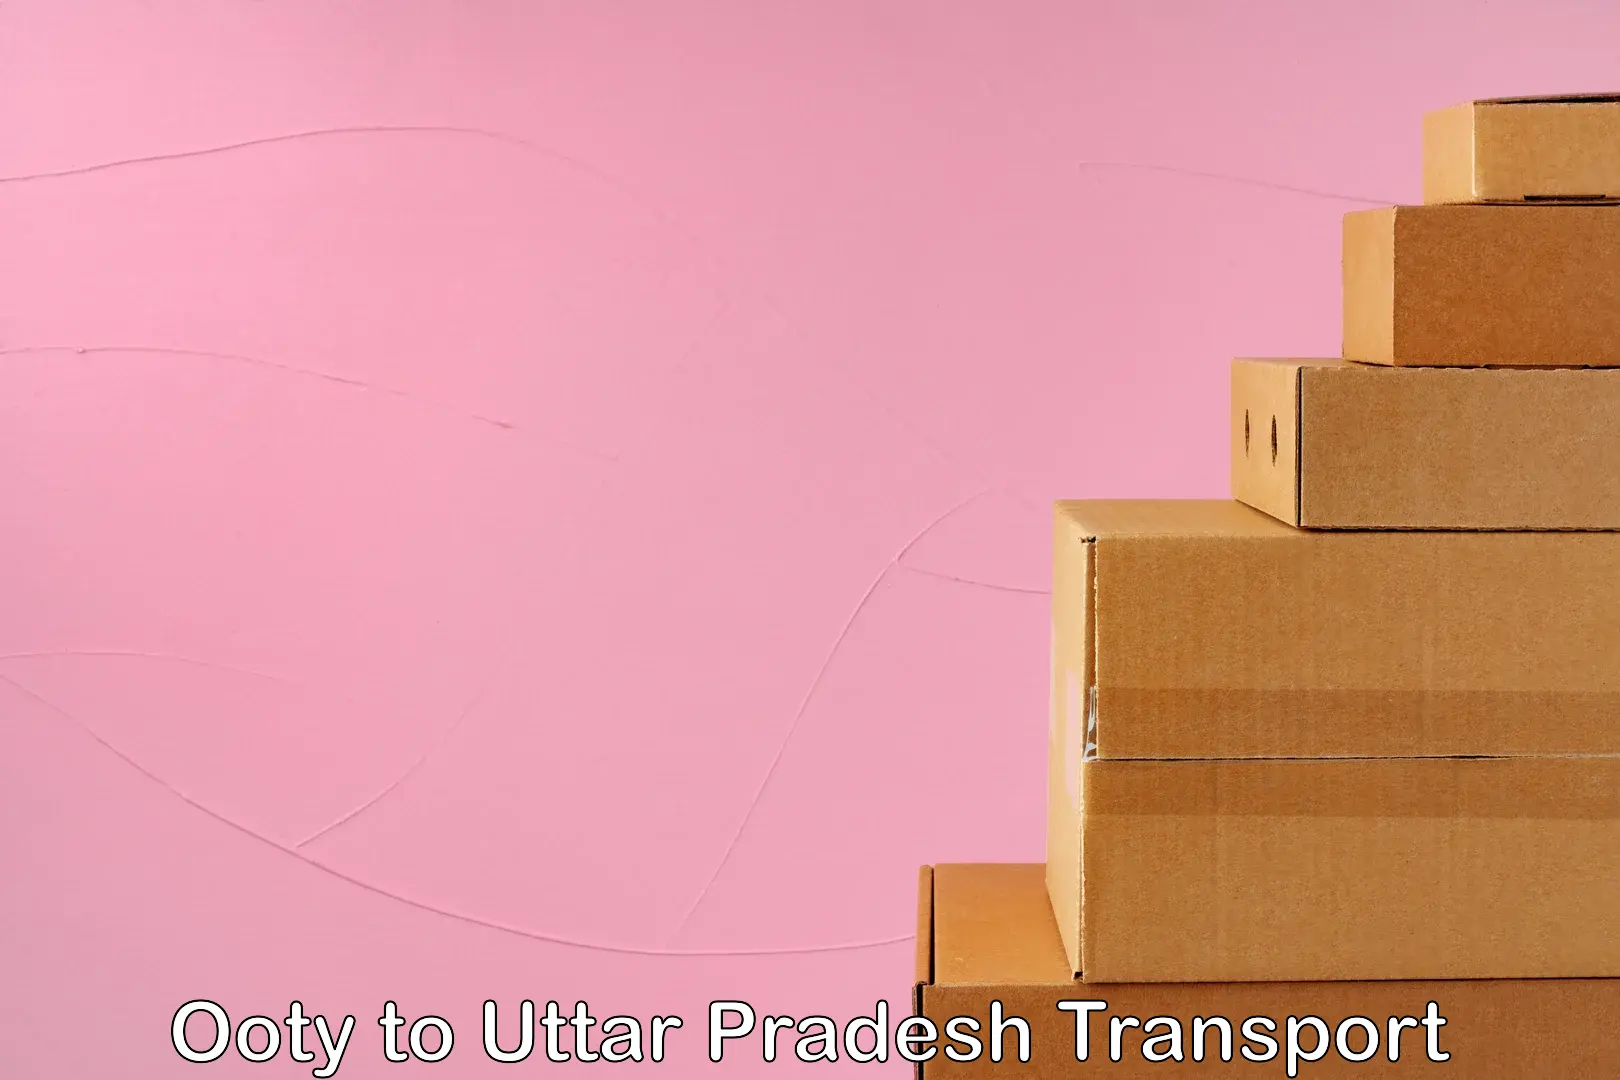 Goods delivery service Ooty to Uttar Pradesh